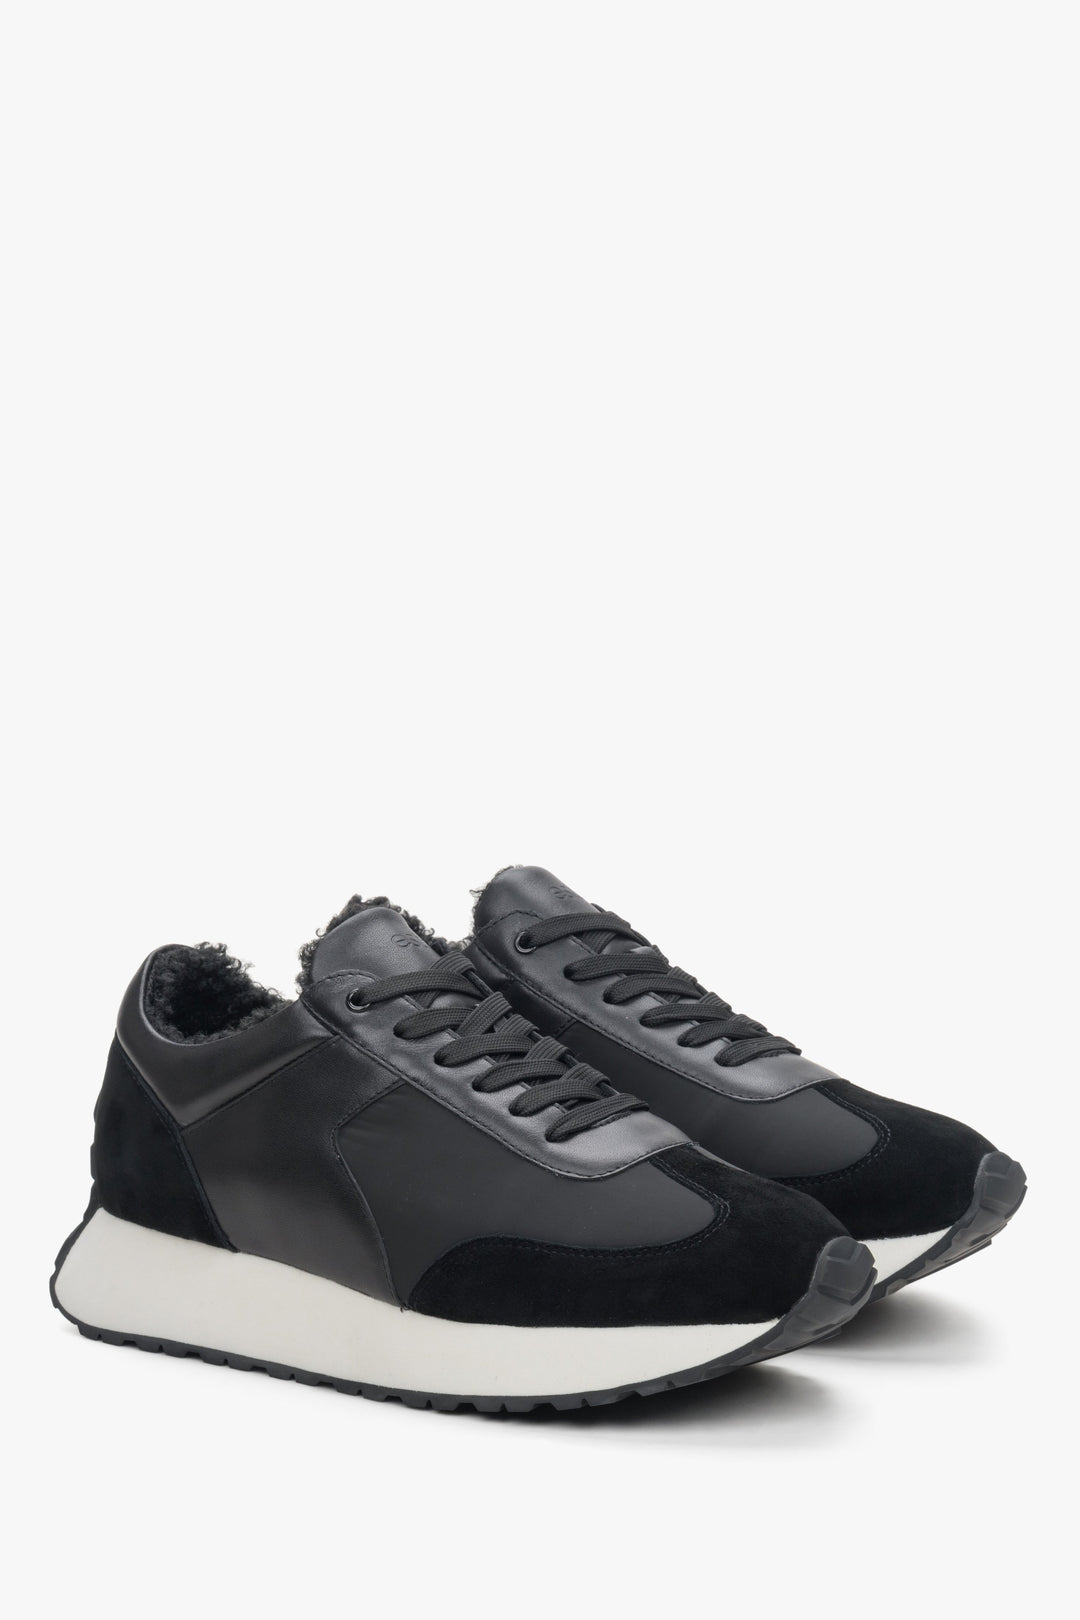 Velvet and leather women's winter sneakers in black by Estro.